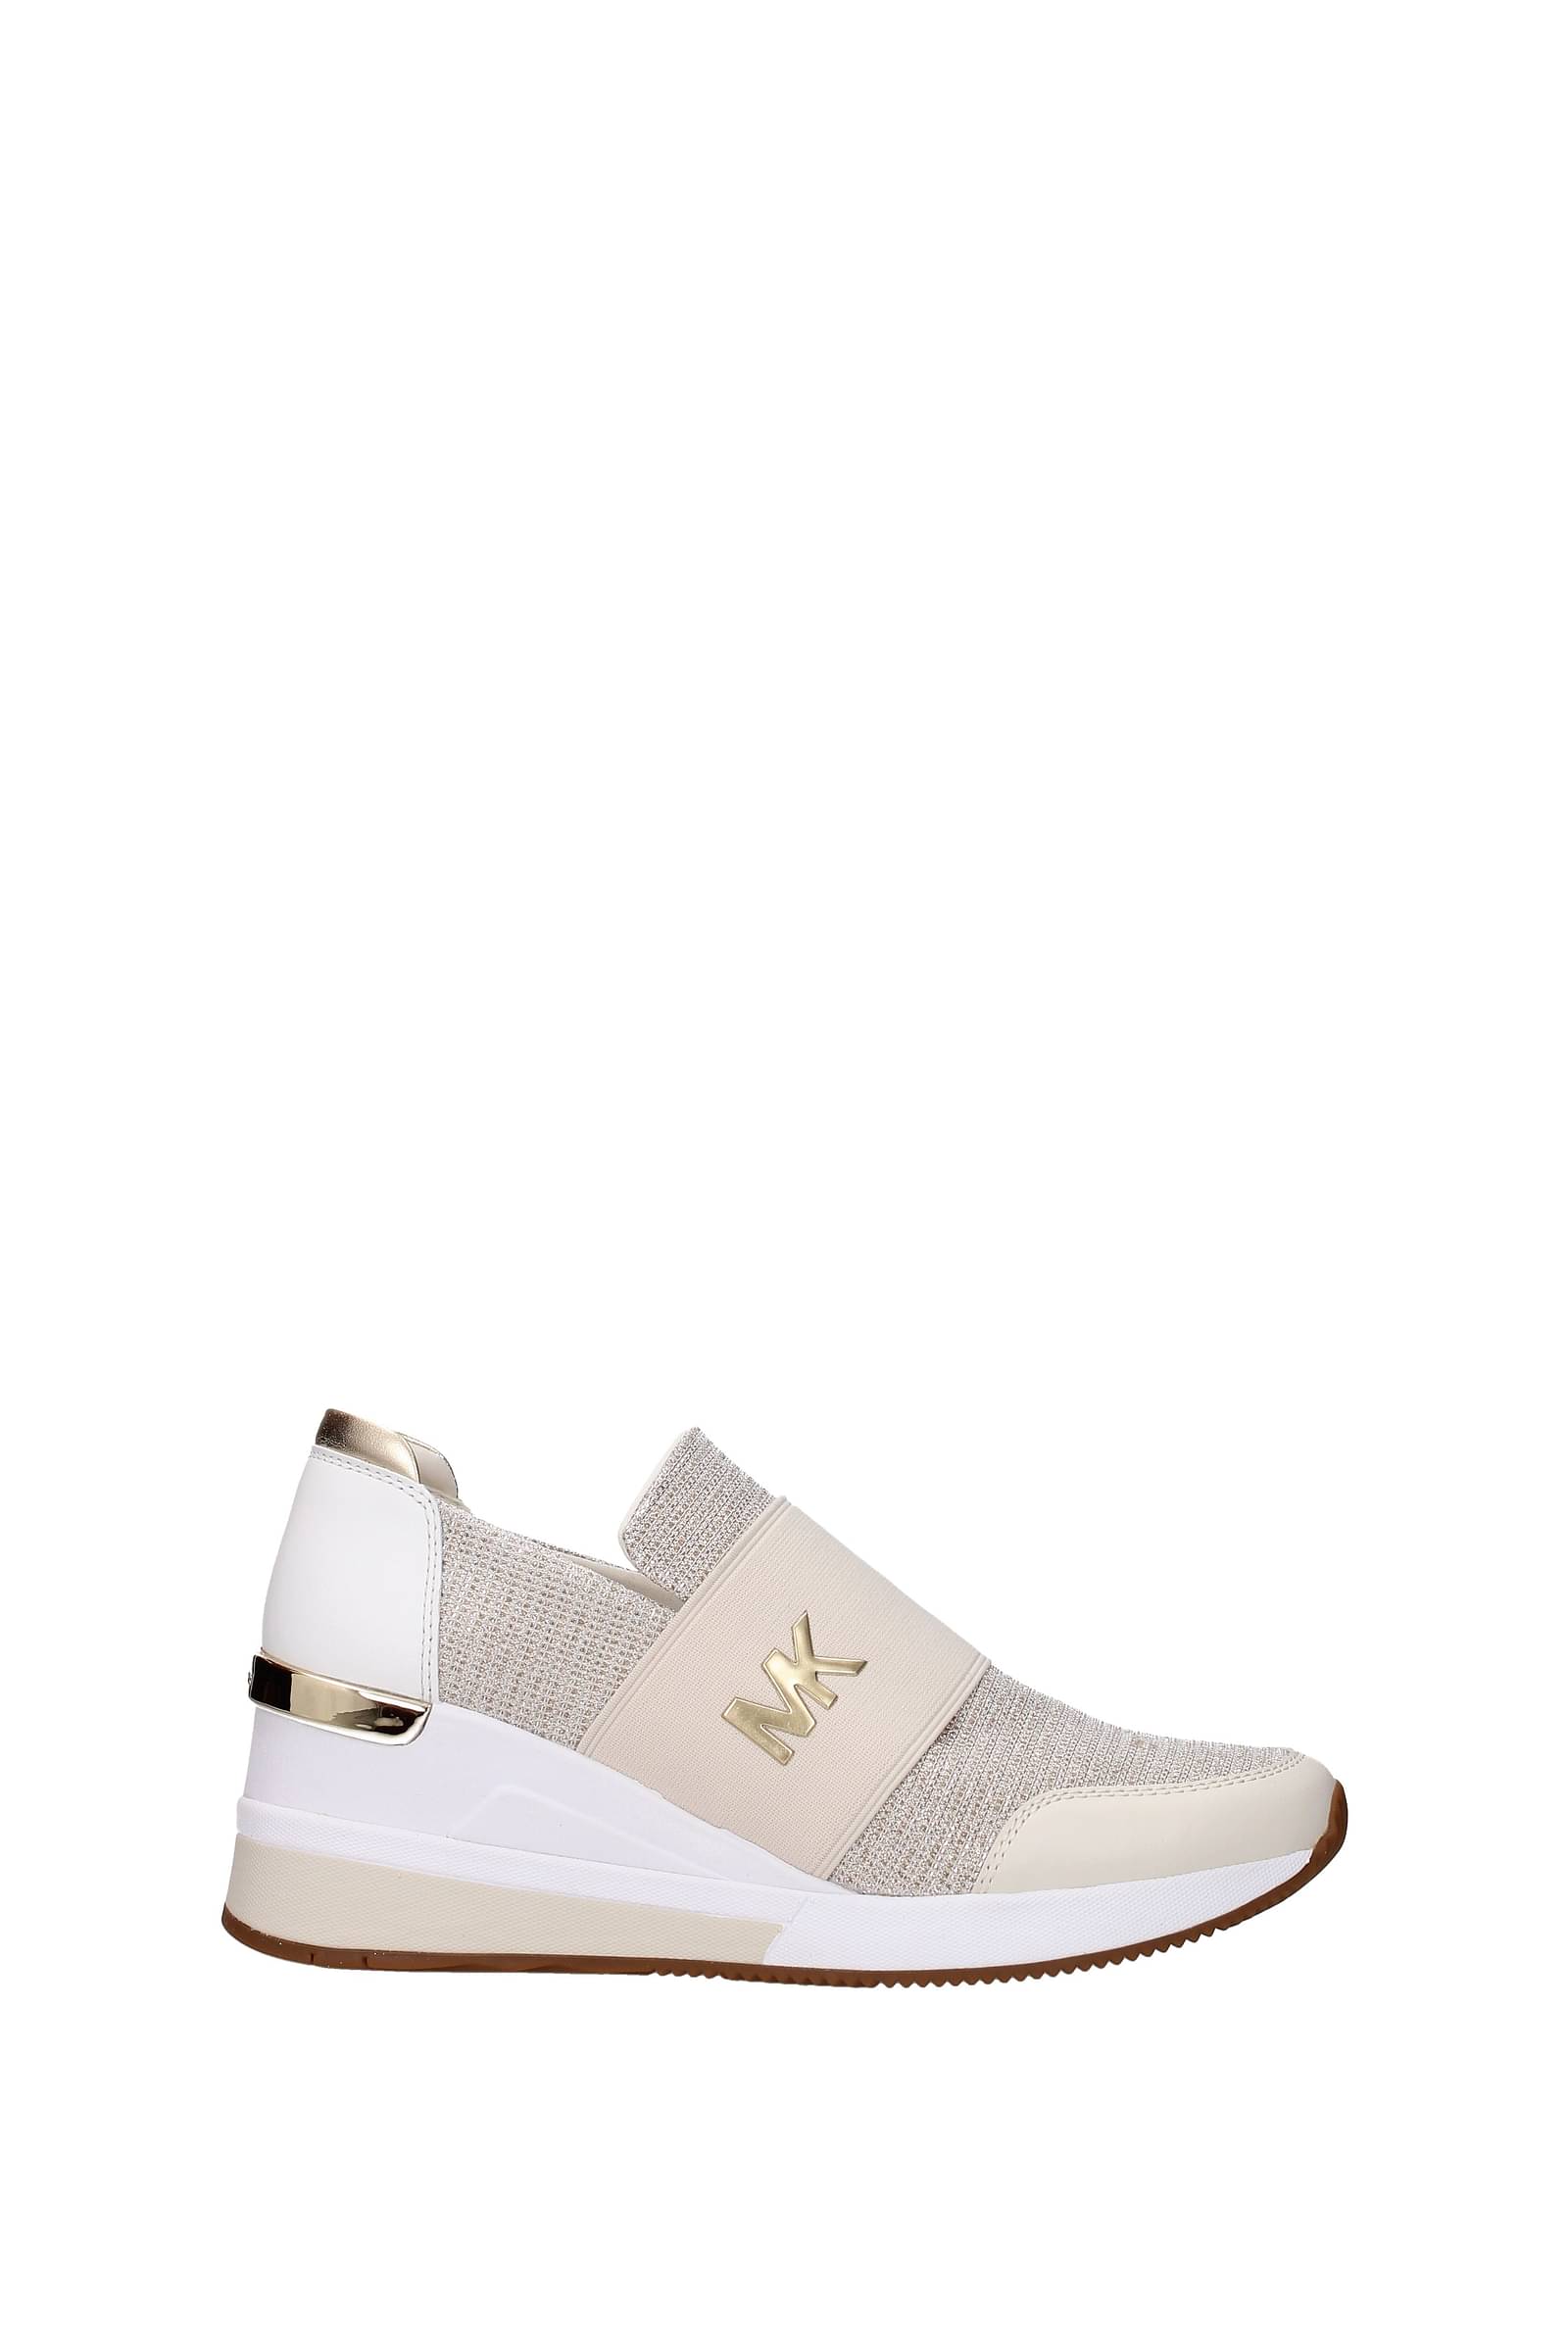 5 Best Michael Kors Wedge Sneakers and Trainers for Women  Michael kors  wedge sneakers Michael kors shoes sneakers Tennis shoes outfit